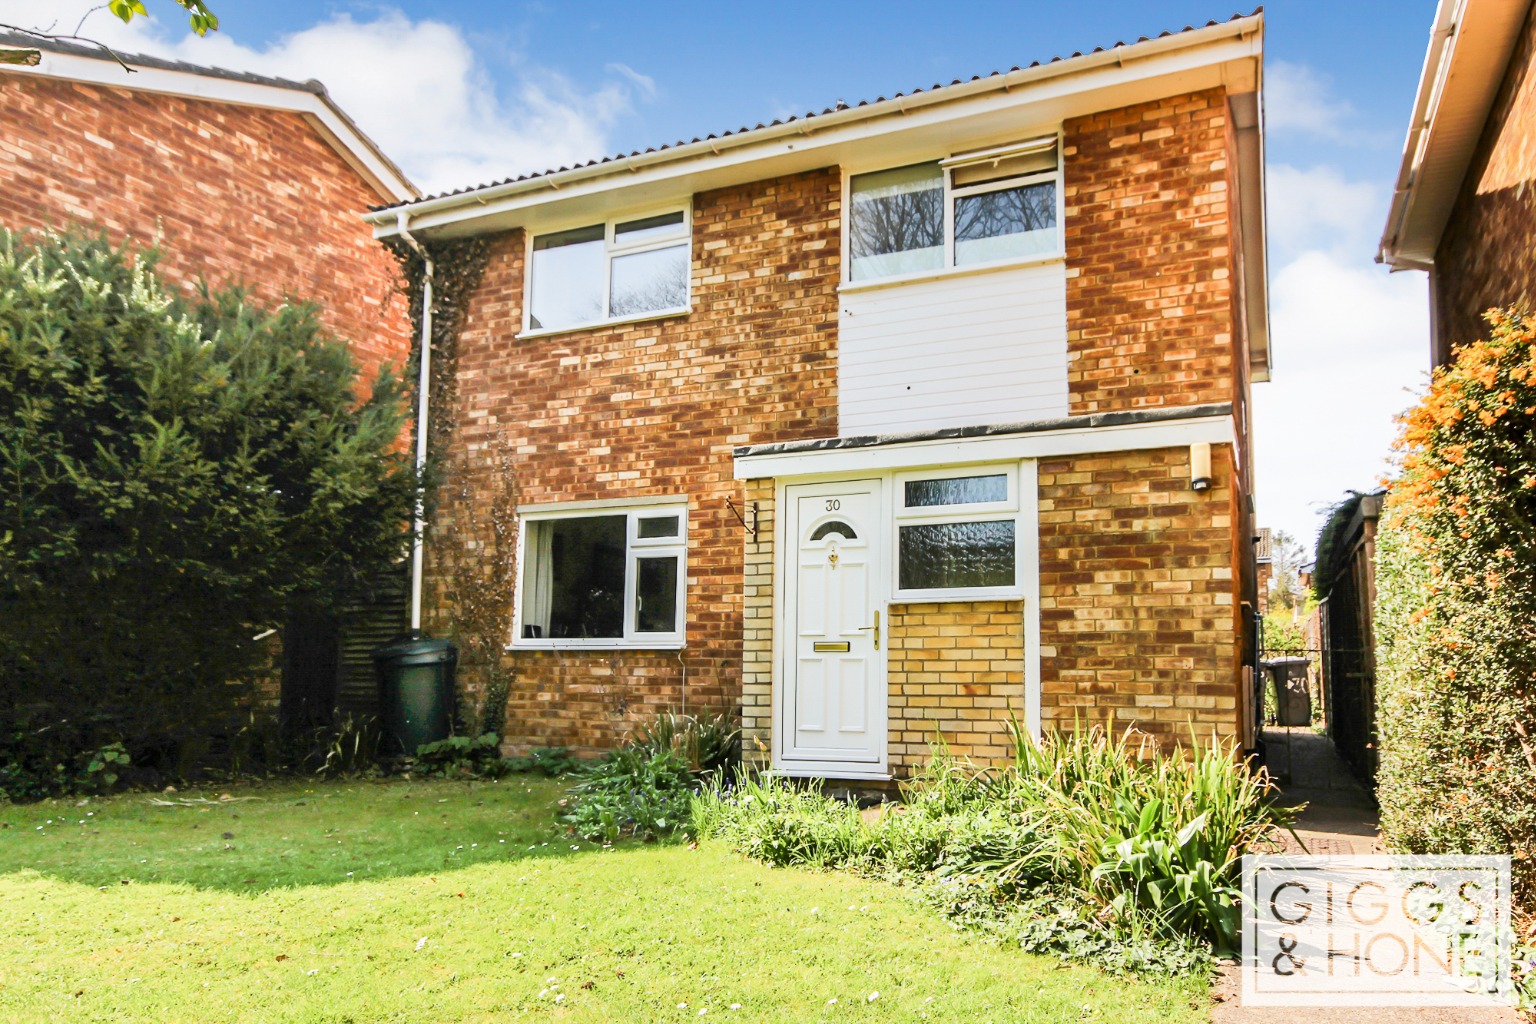 3 bed detached house for sale in Townsend Close, Bedford - Property Image 1